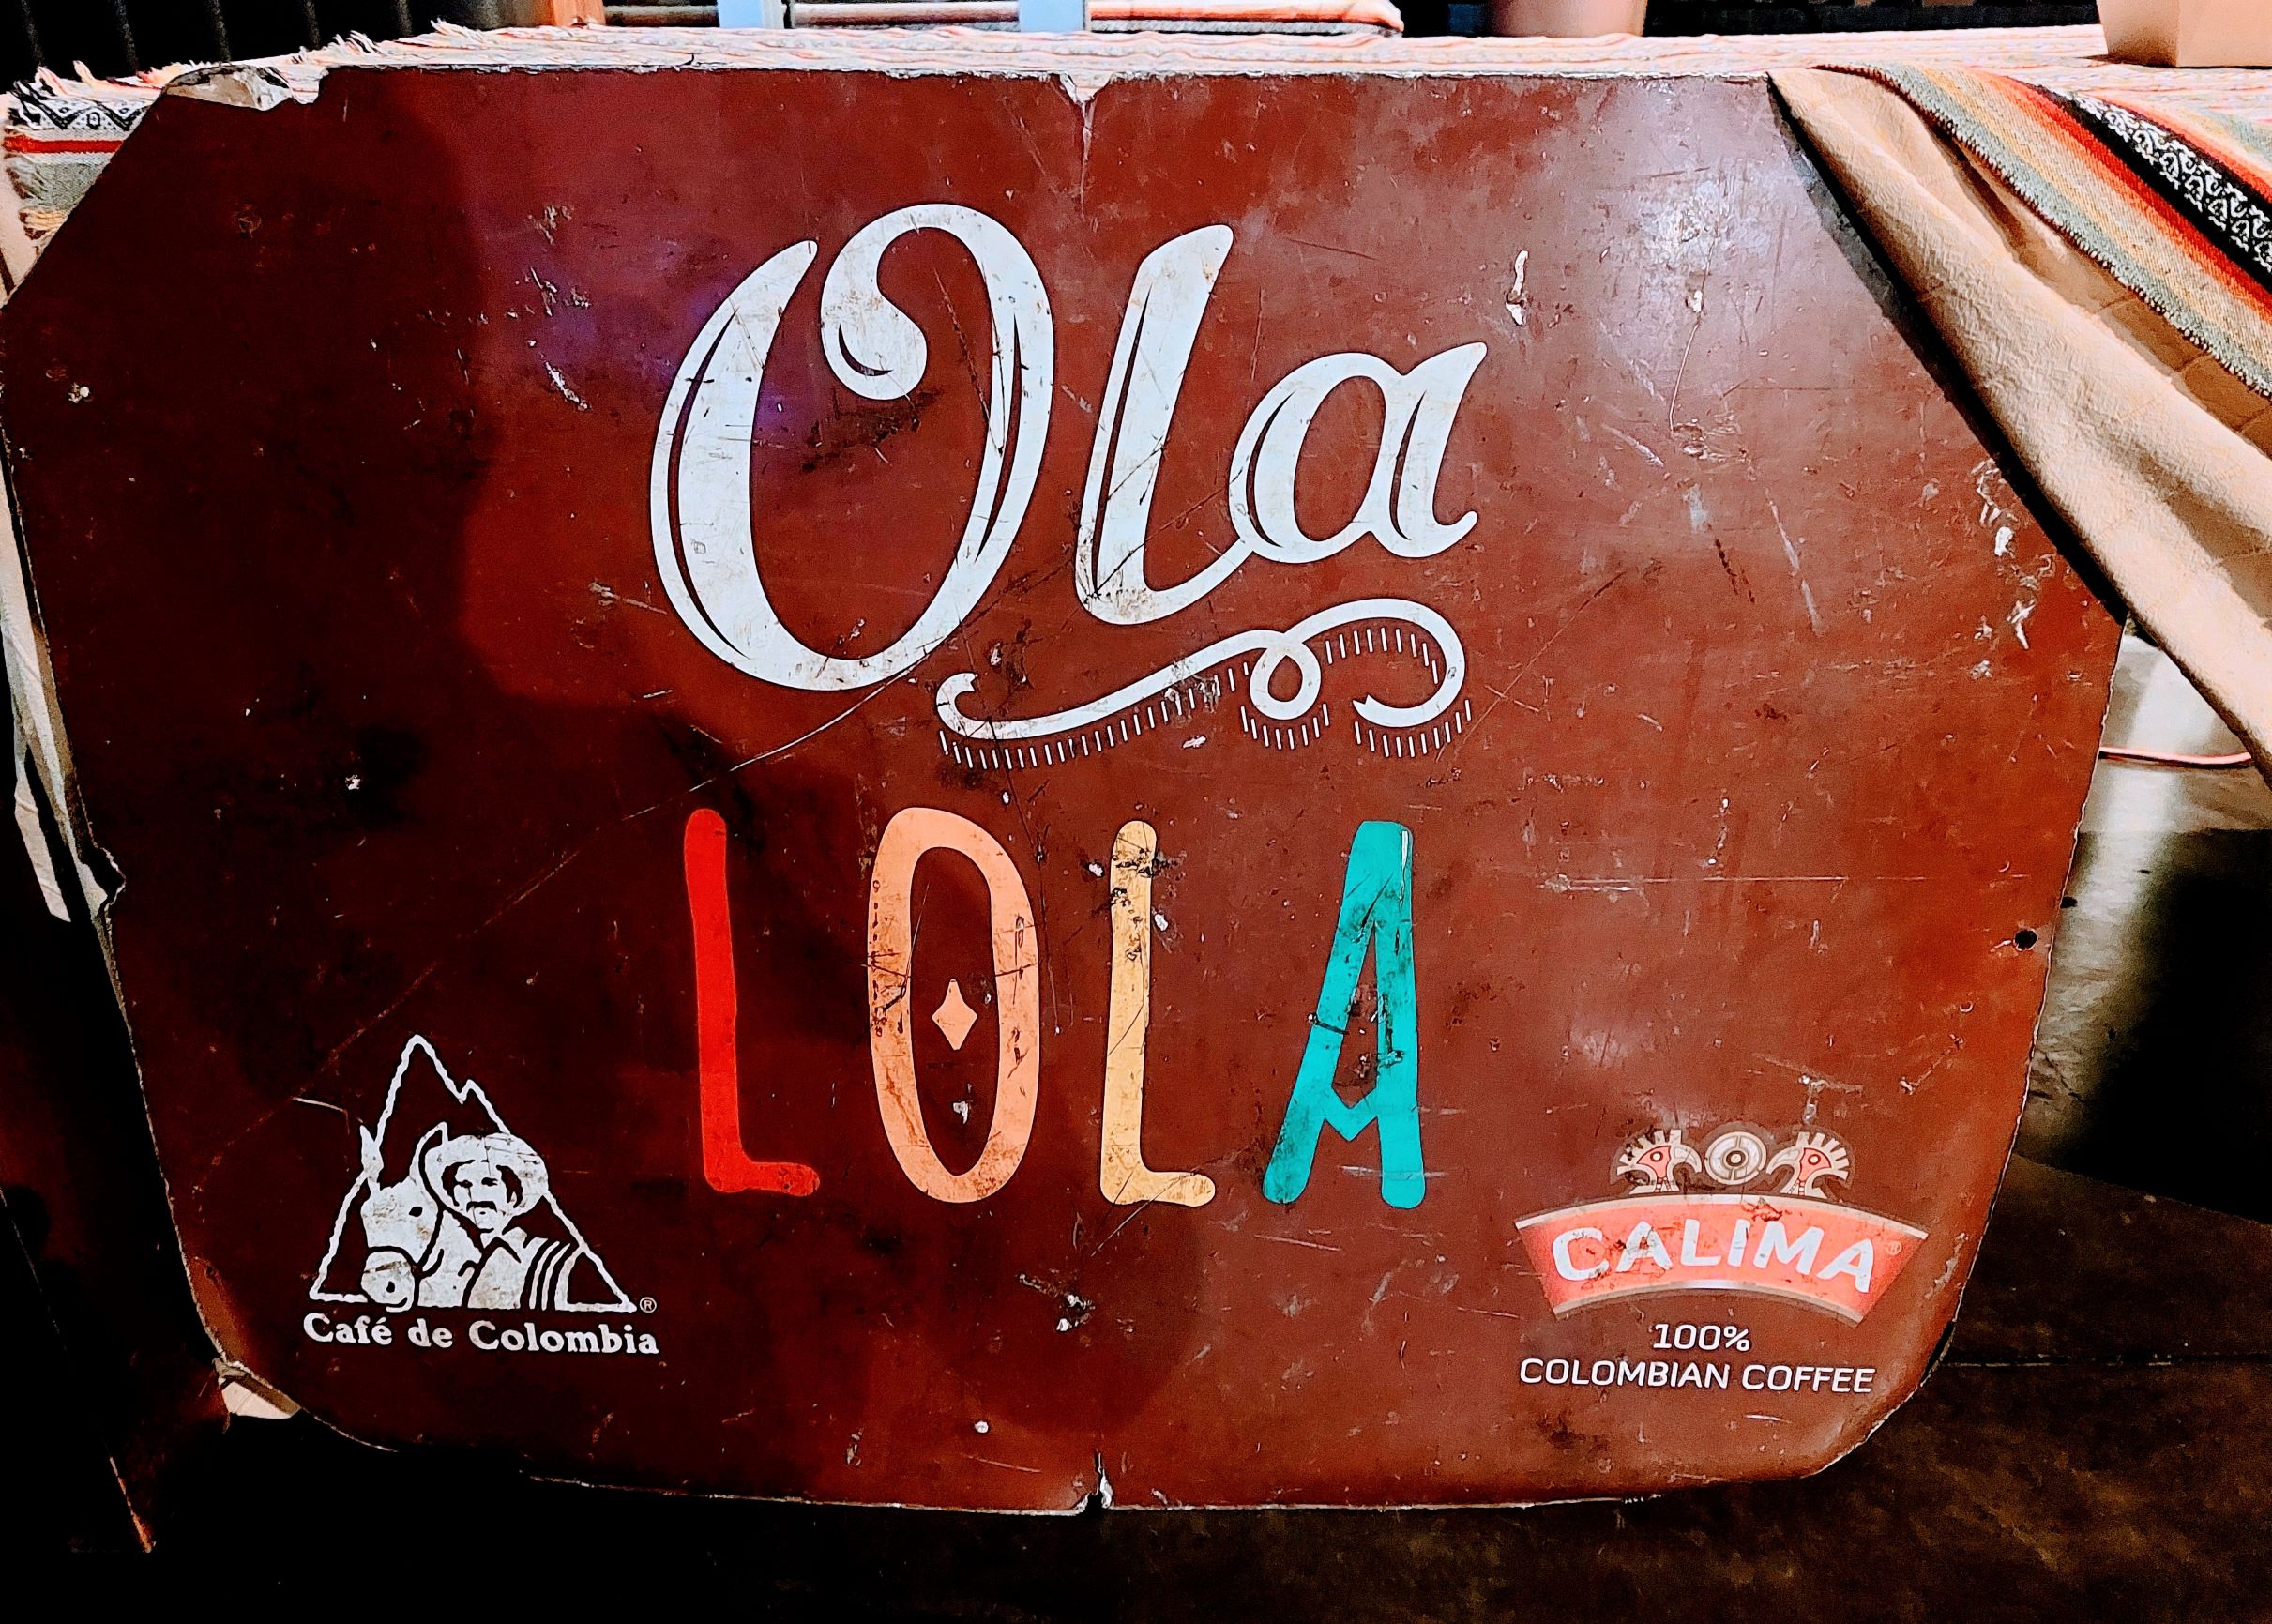 A promotional placard of Ola Lola catering firm